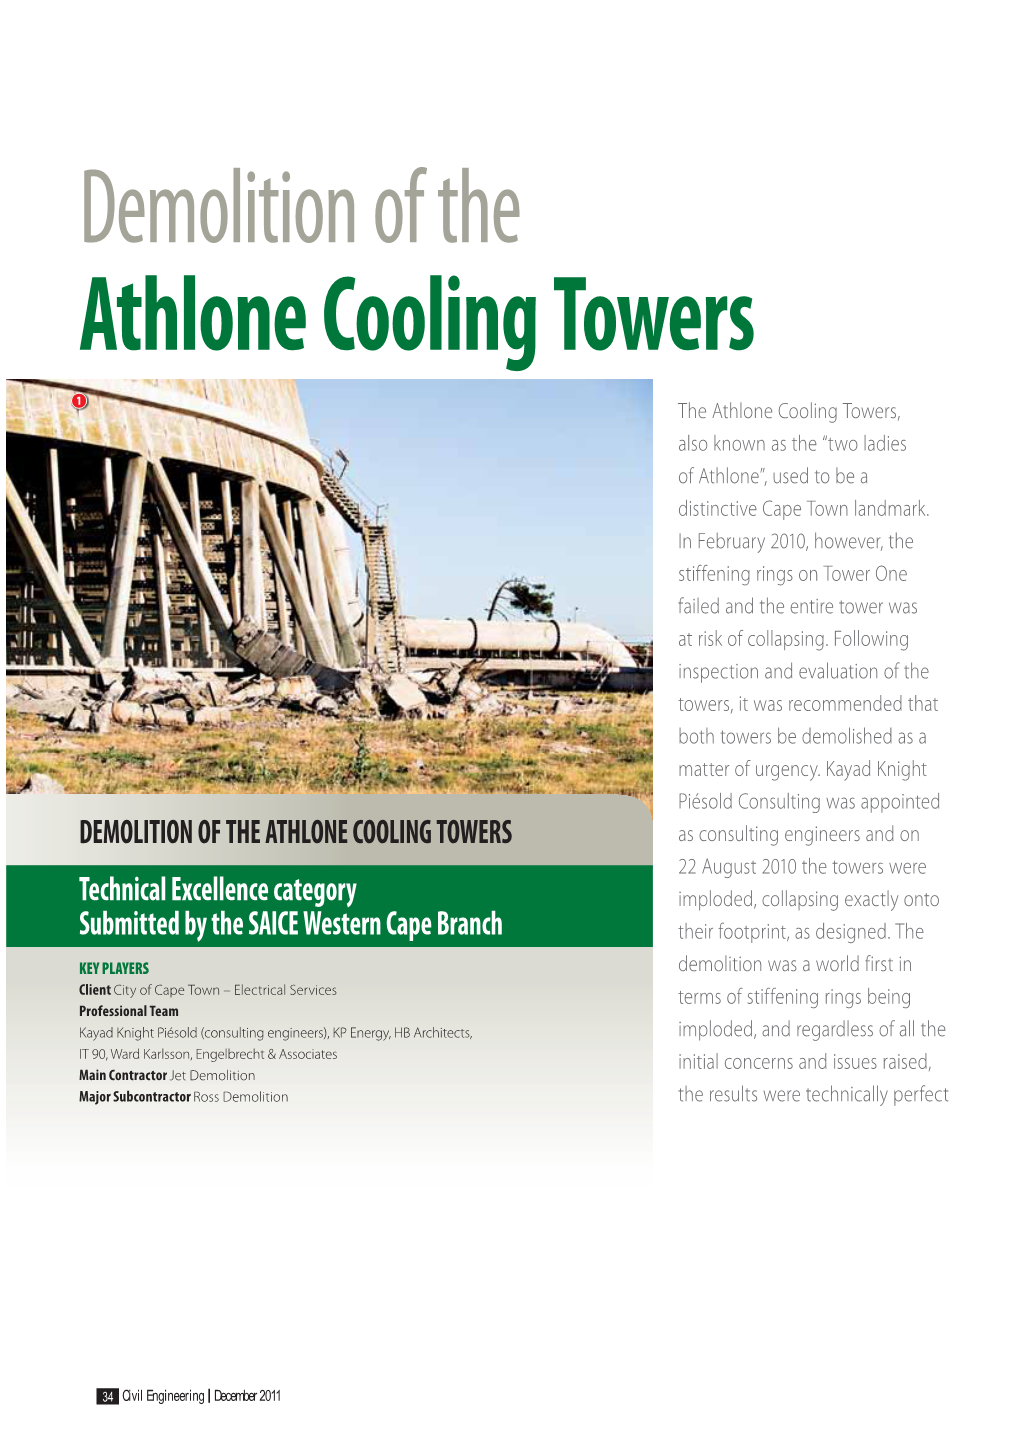 Demolition of the Athlone Cooling Towers